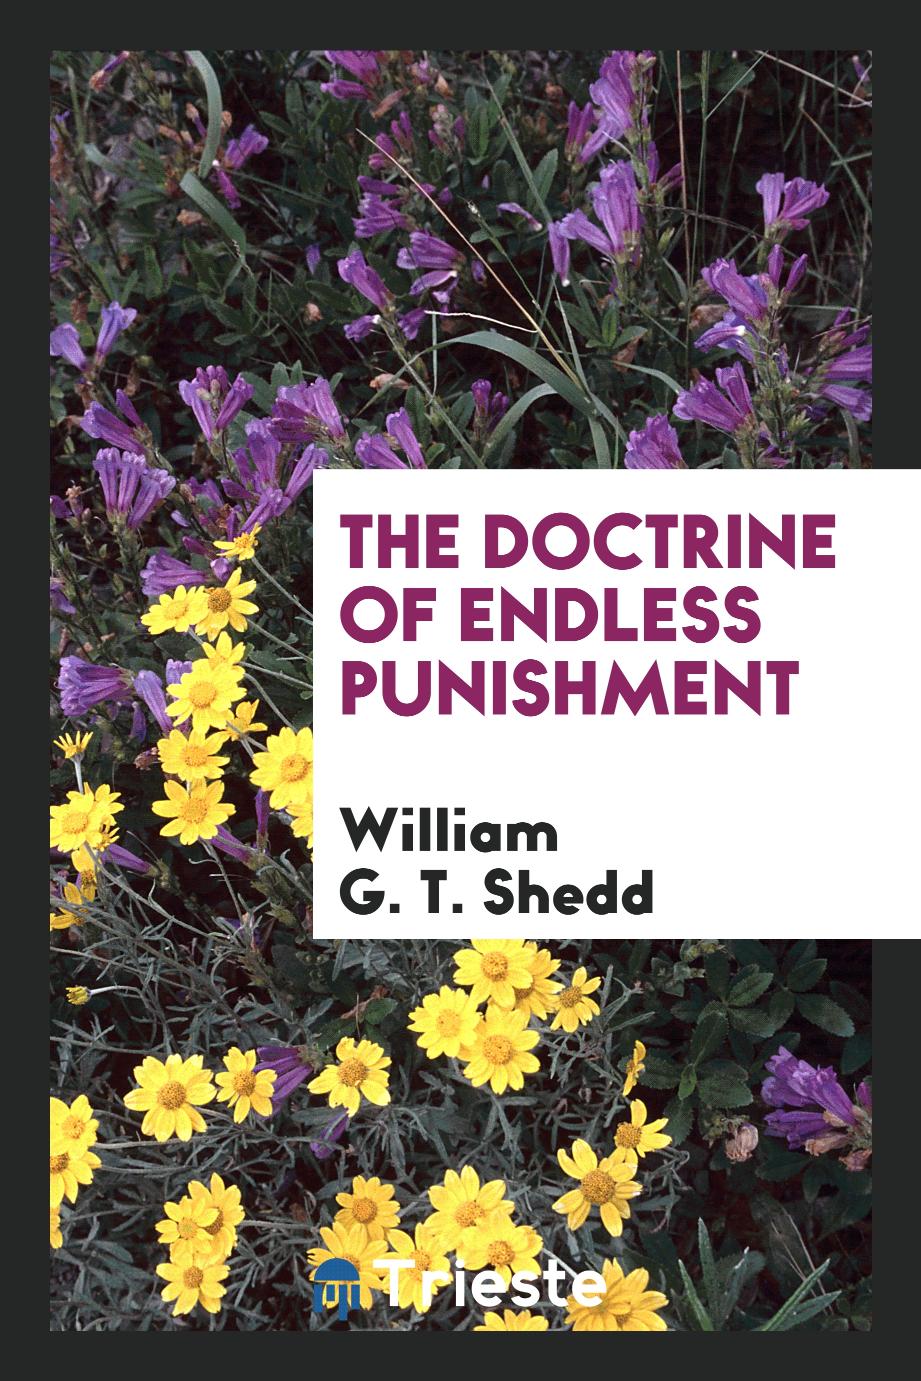 William G. T. Shedd - The Doctrine of Endless Punishment